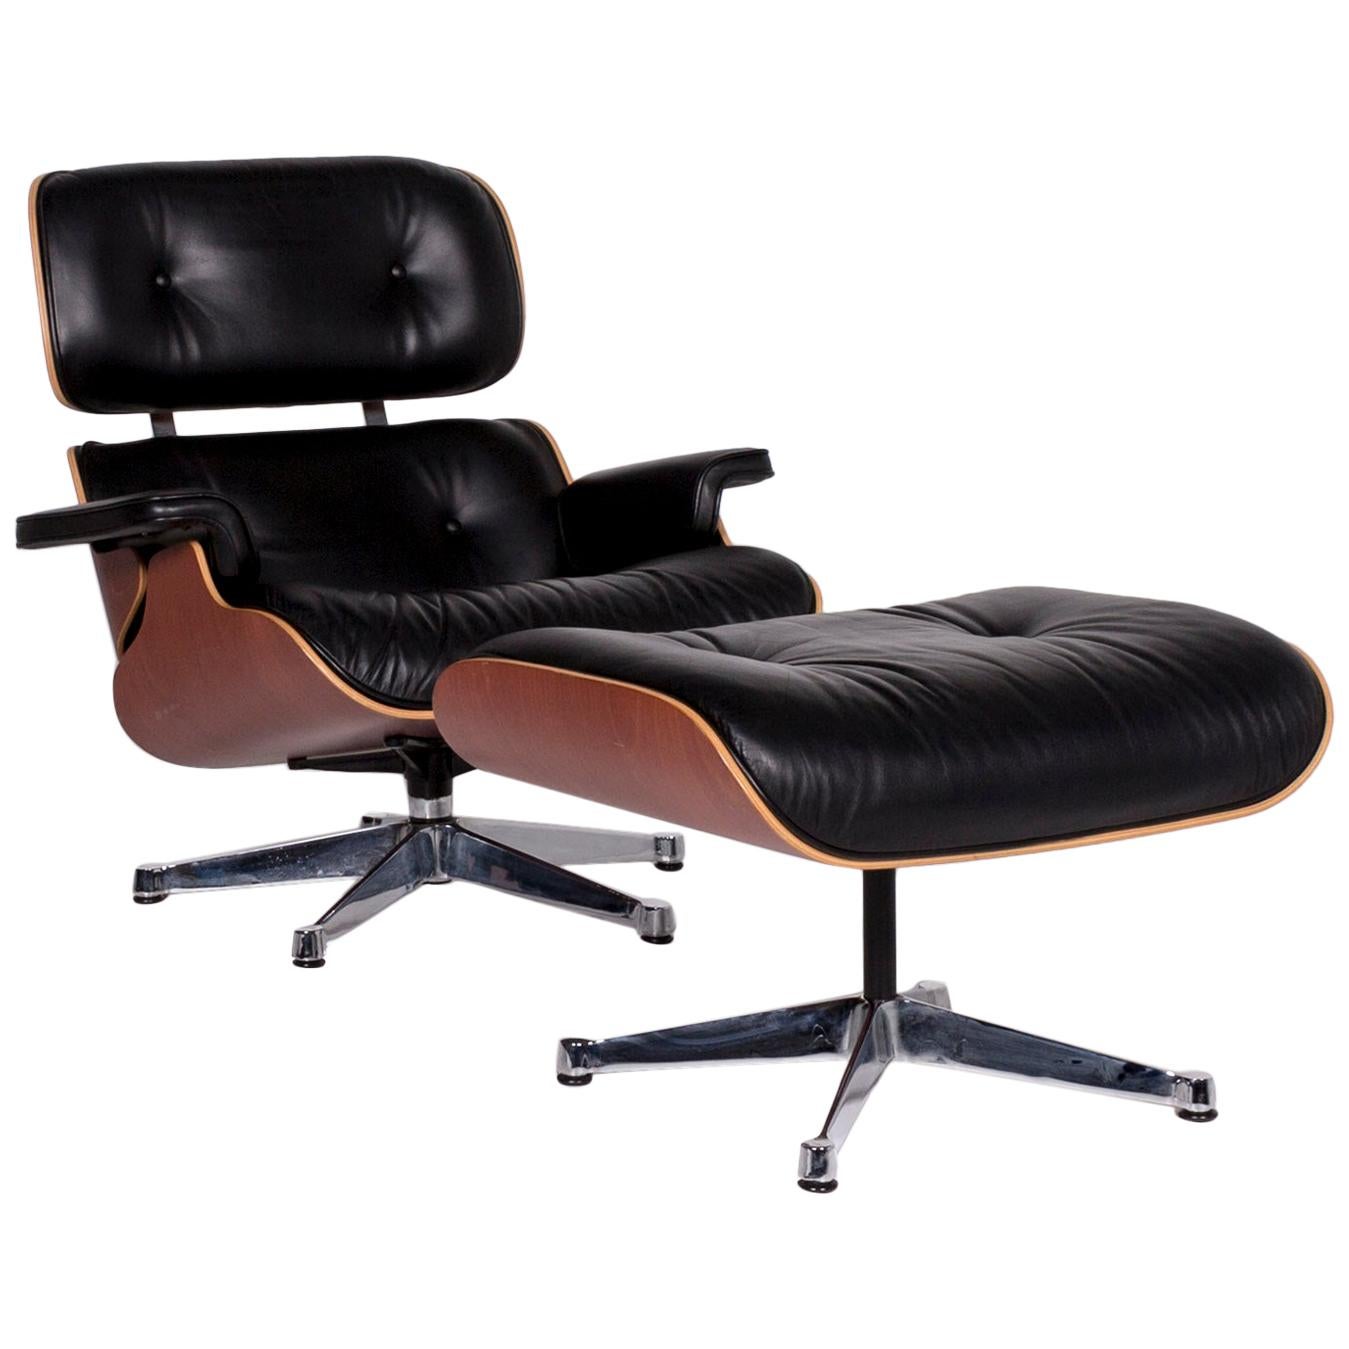 Vitra Eames Lounge Chair Leather Armchair Black Incl. Stool Cherrywood Club